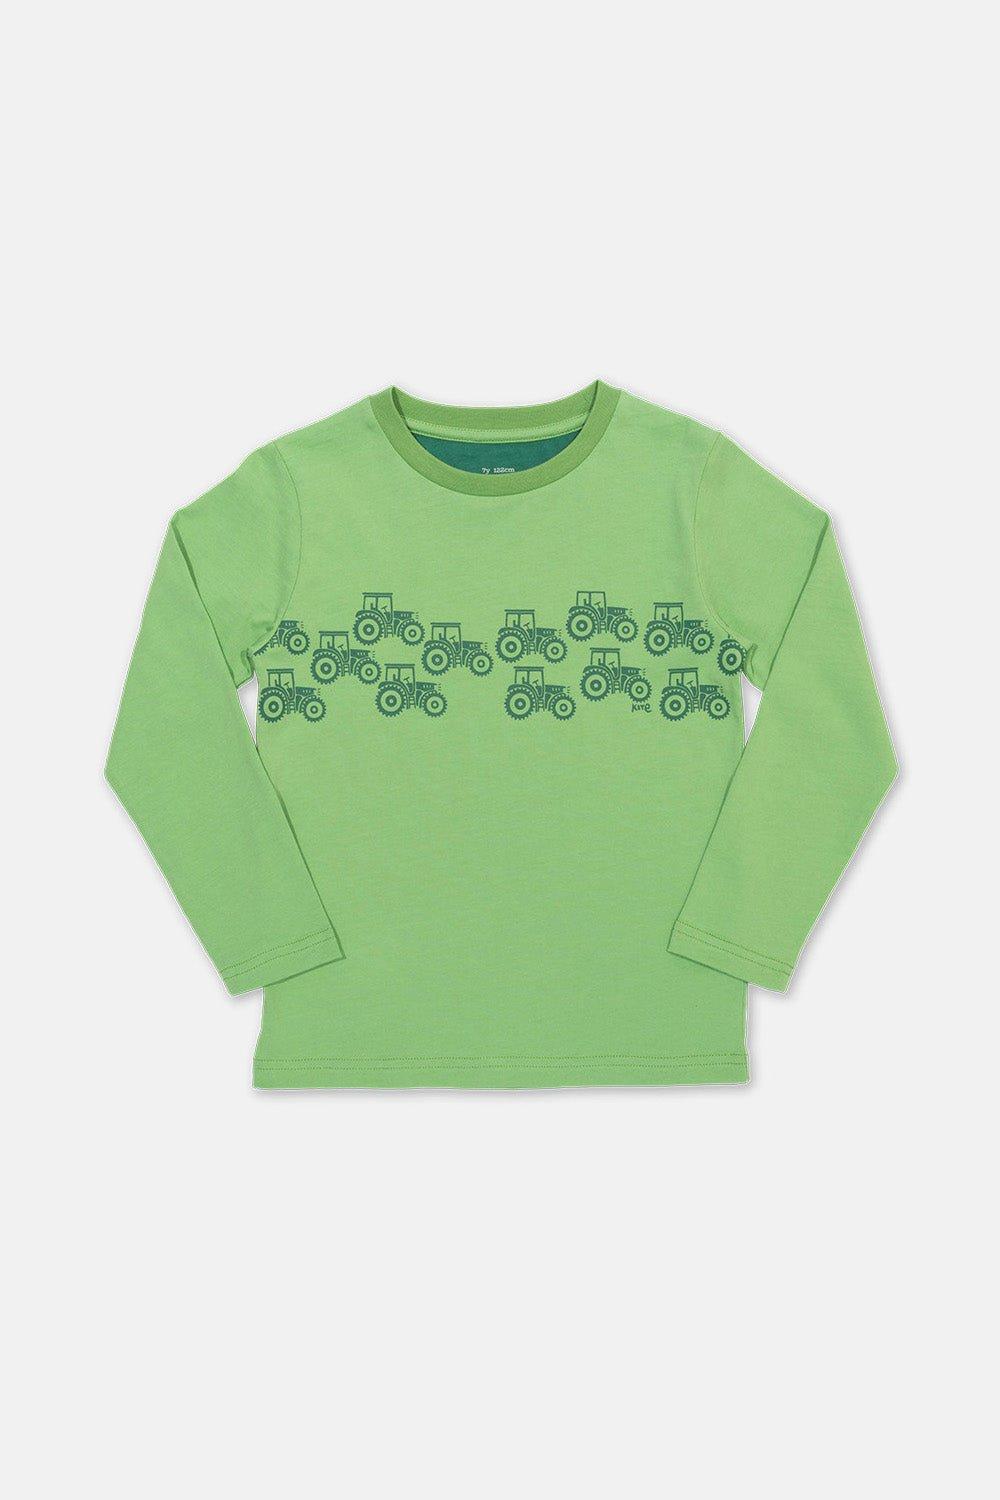 Tractor Treads T-Shirt